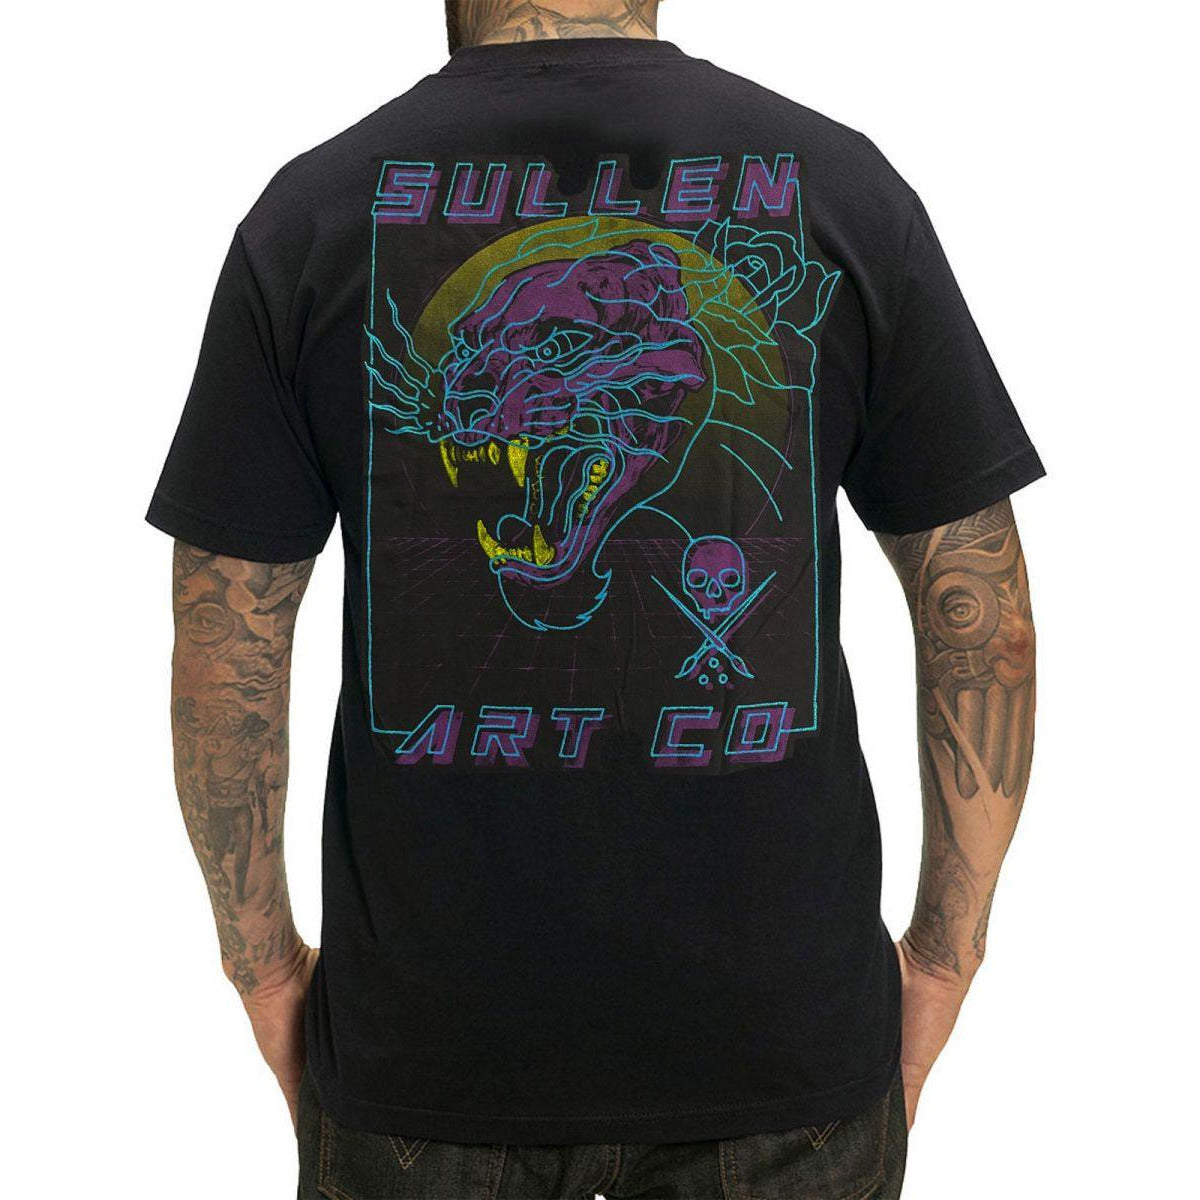 SULLEN-ART-COLLECTIVE-FUTURE-NIGHT-SHADE-SS-TEE - T-SHIRT - Synik Clothing - synikclothing.com